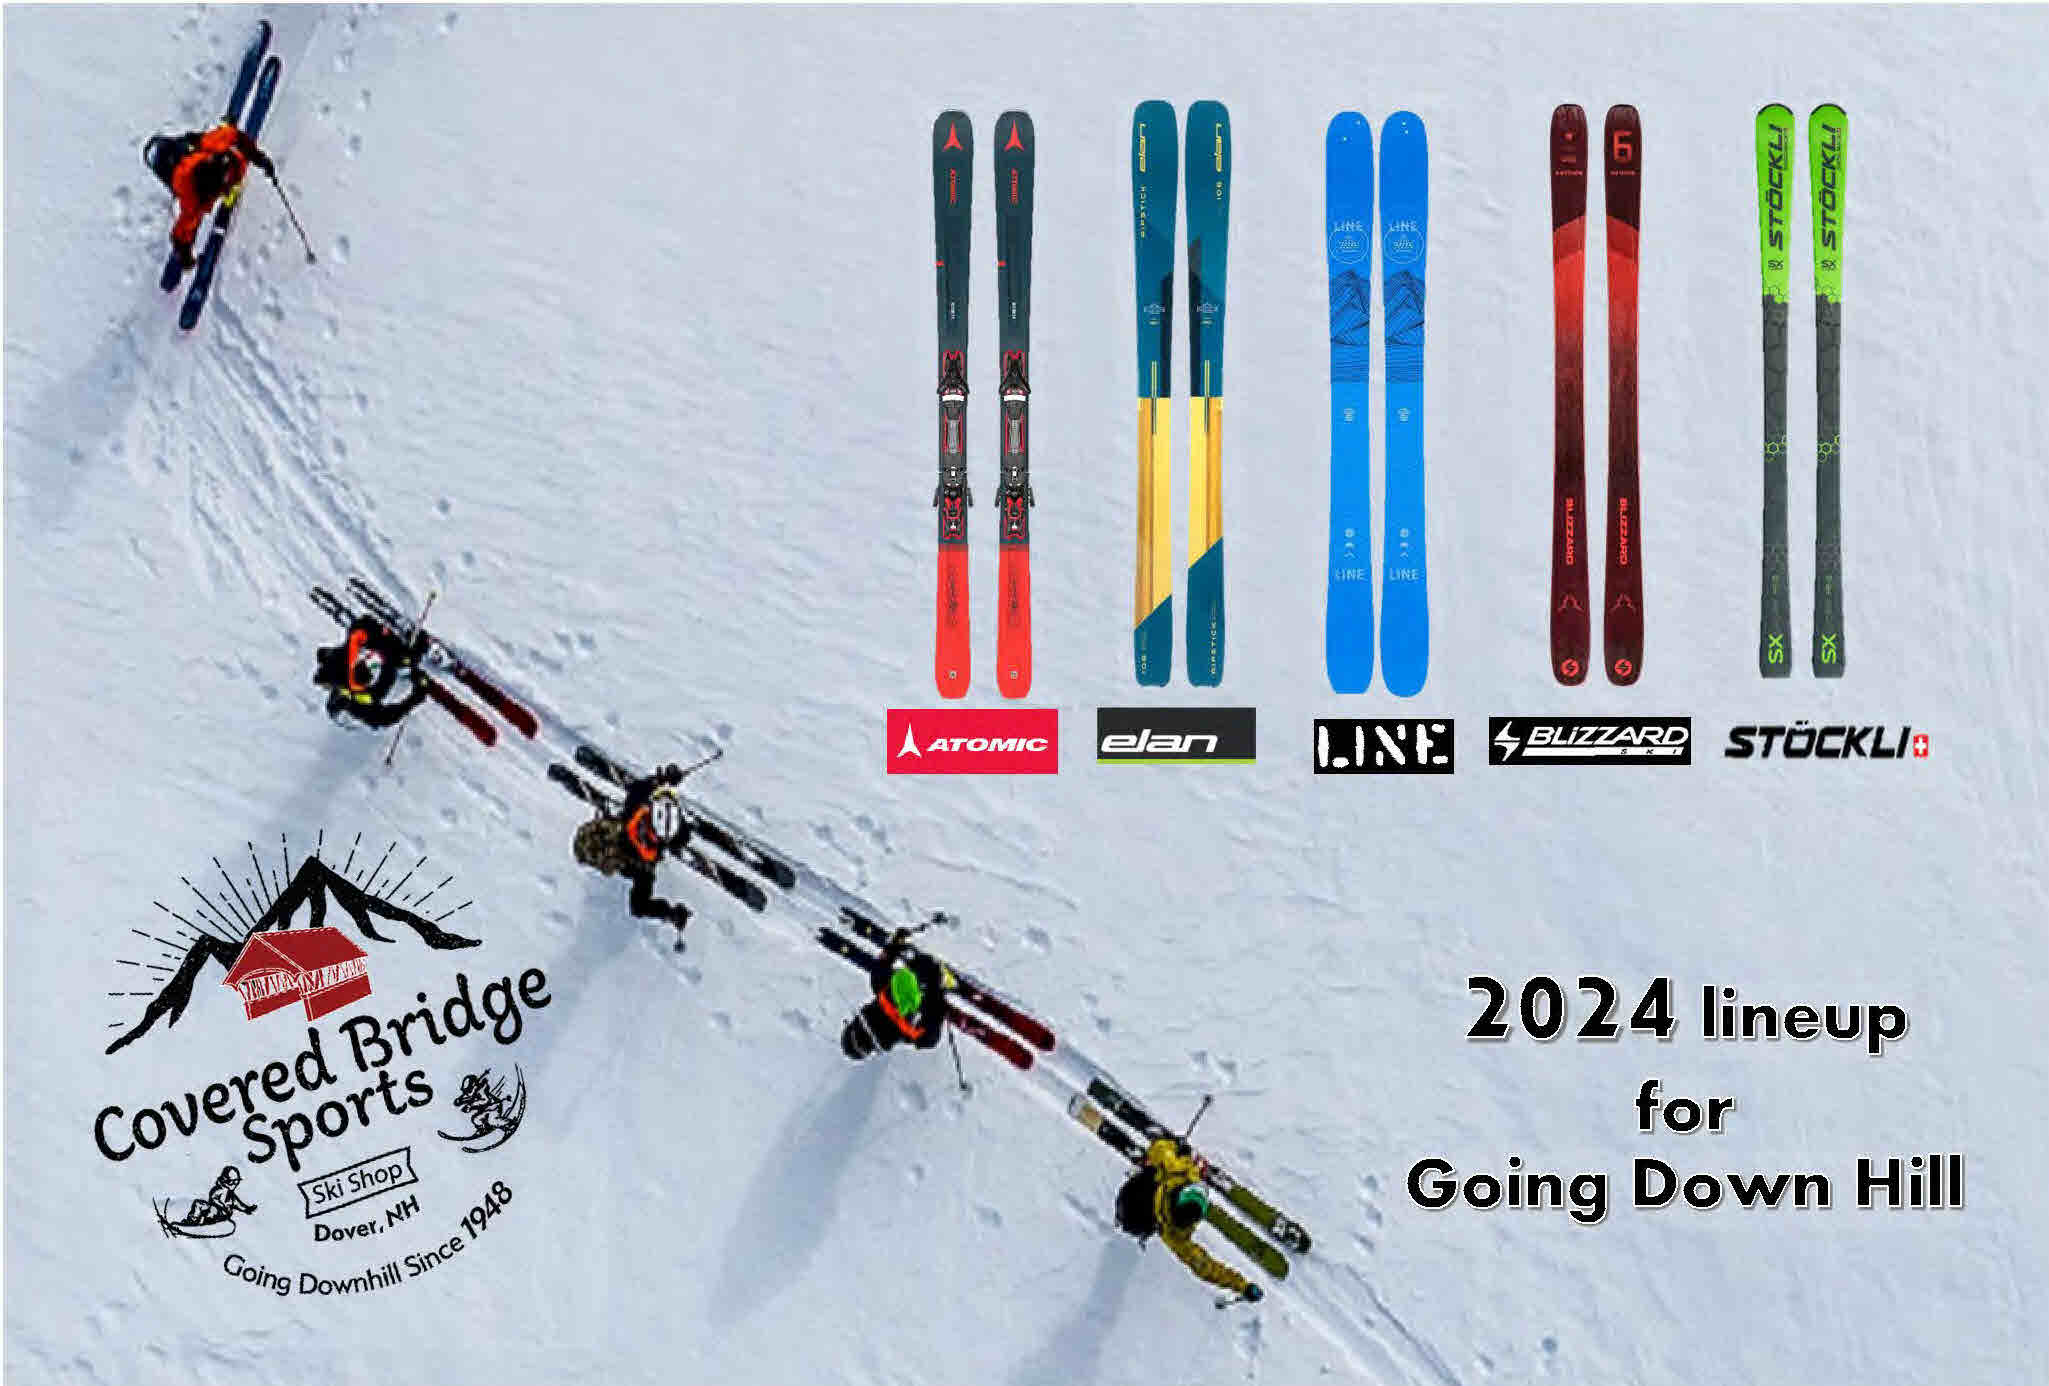 2024 LINE UPOF SKIS